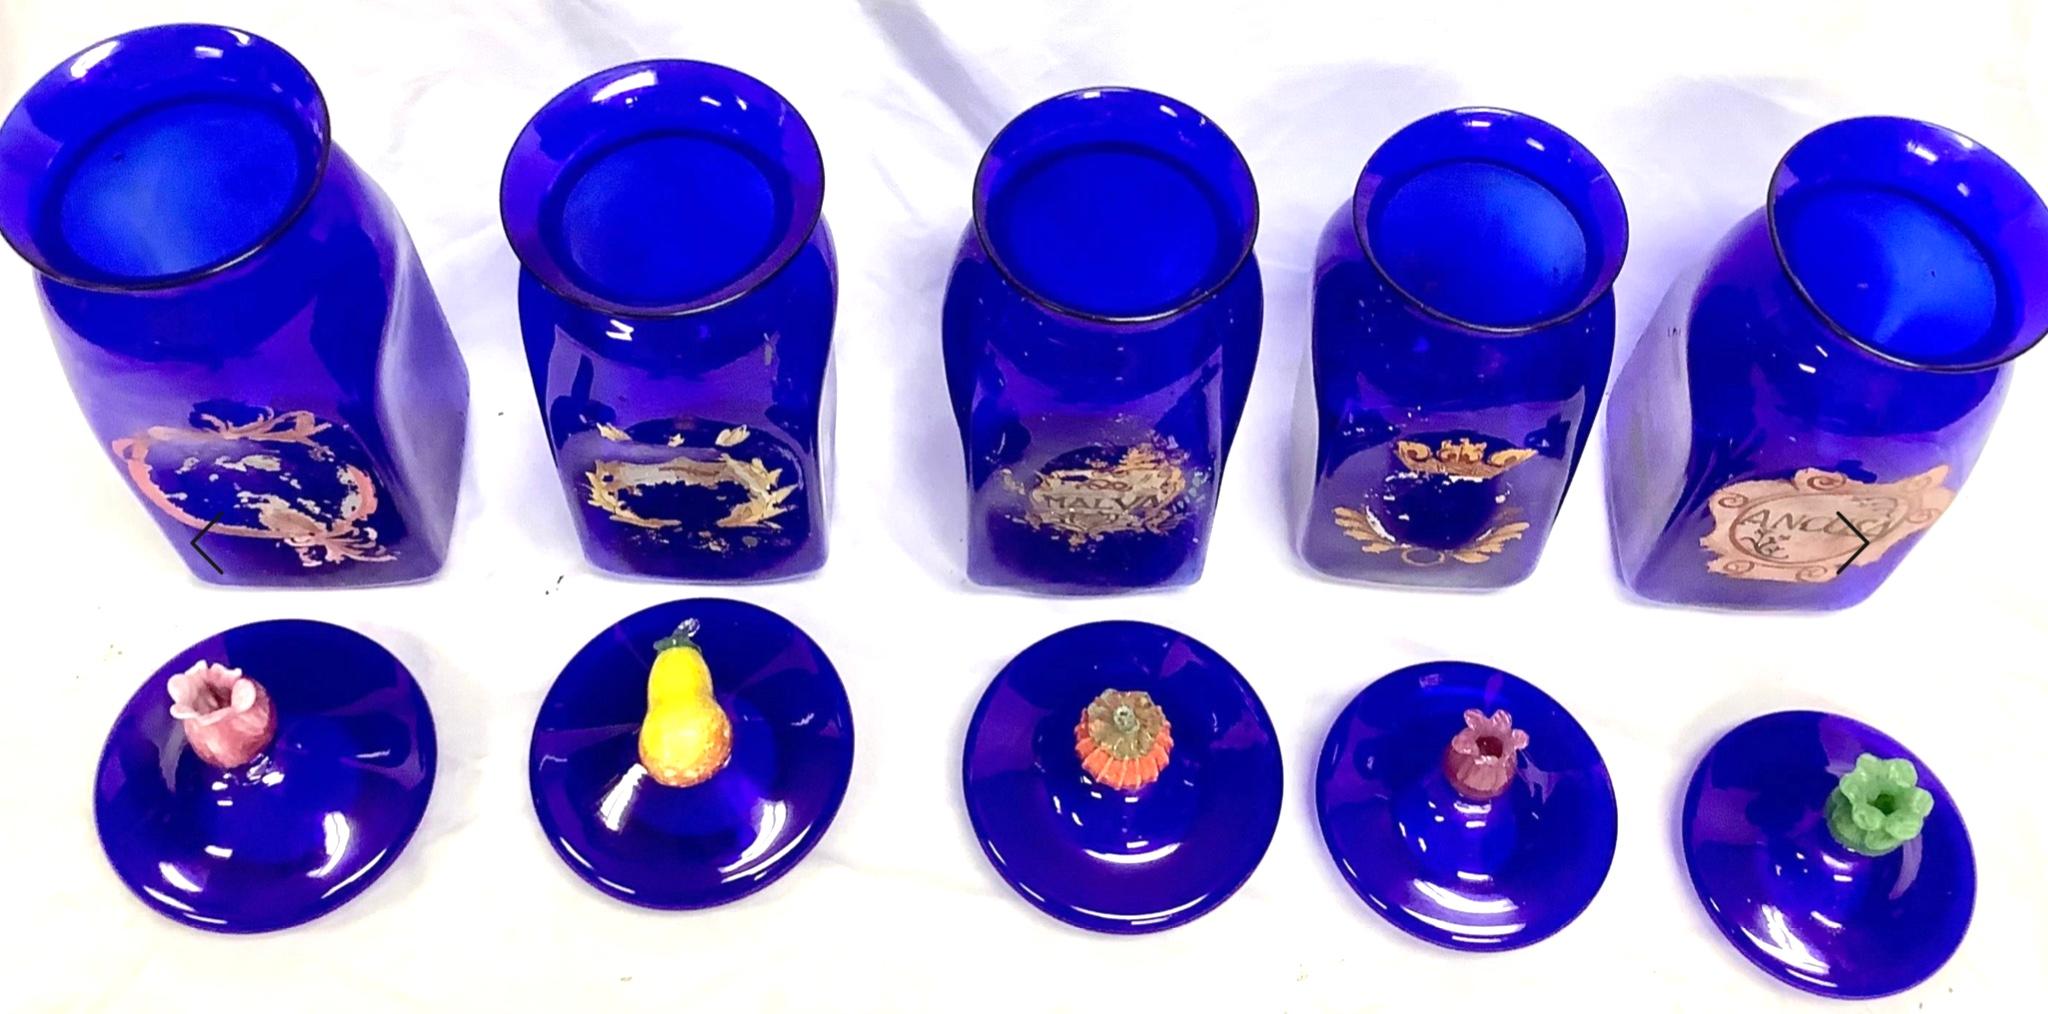 Rare vintage cobalt blue venetian glass apothecary jars. Set of 5. Each jar has a lid with glass fruit or flower as handle. Perfect for vanity or bathroom storage. Very good condition, some wear to painted labels and two glass lid repairs (see